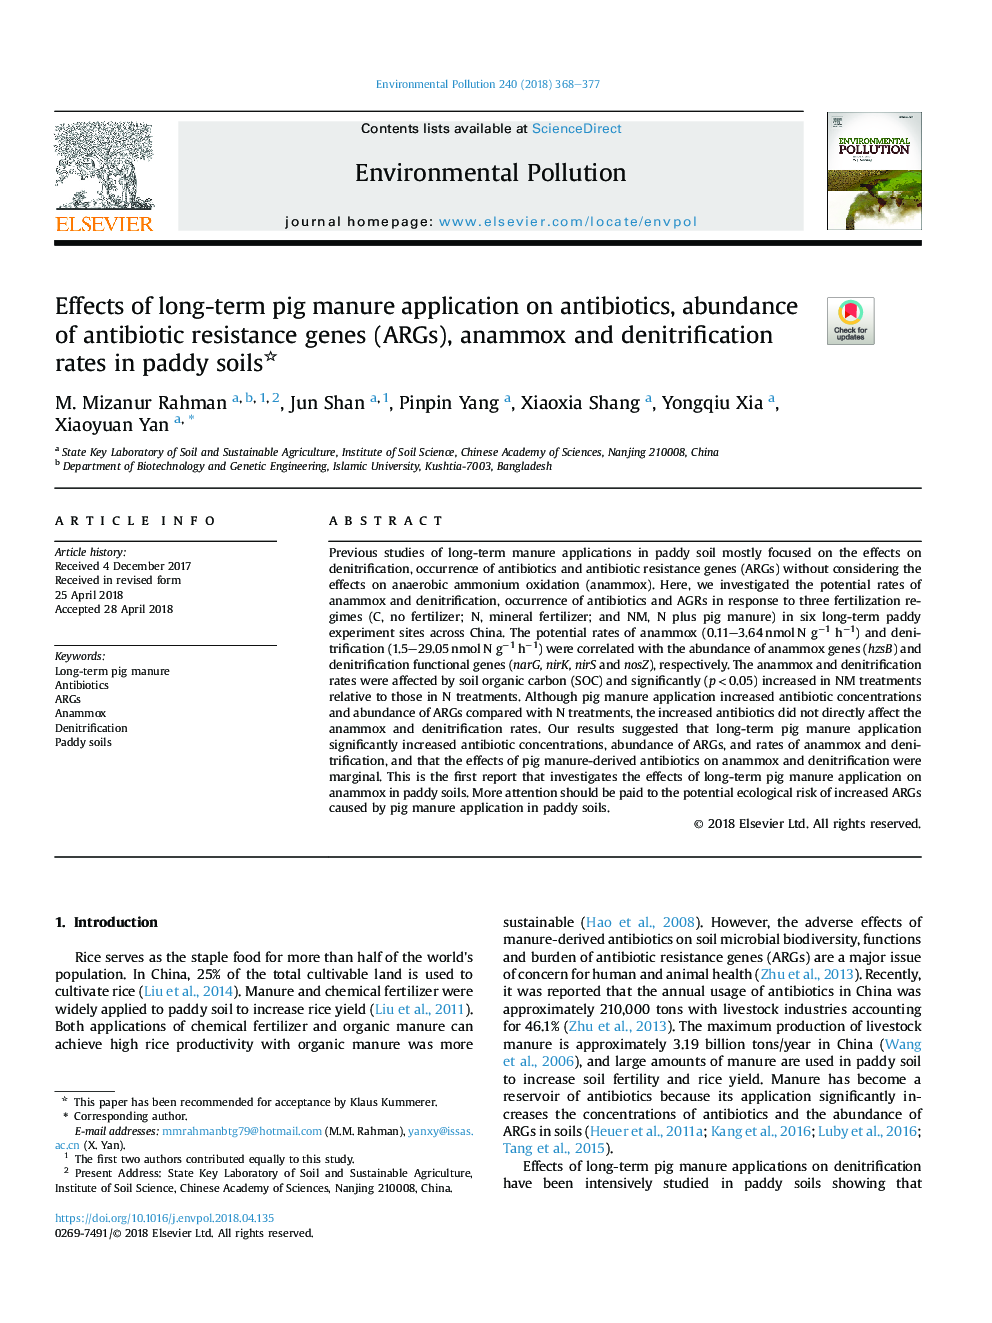 Effects of long-term pig manure application on antibiotics, abundance of antibiotic resistance genes (ARGs), anammox and denitrification rates in paddy soils